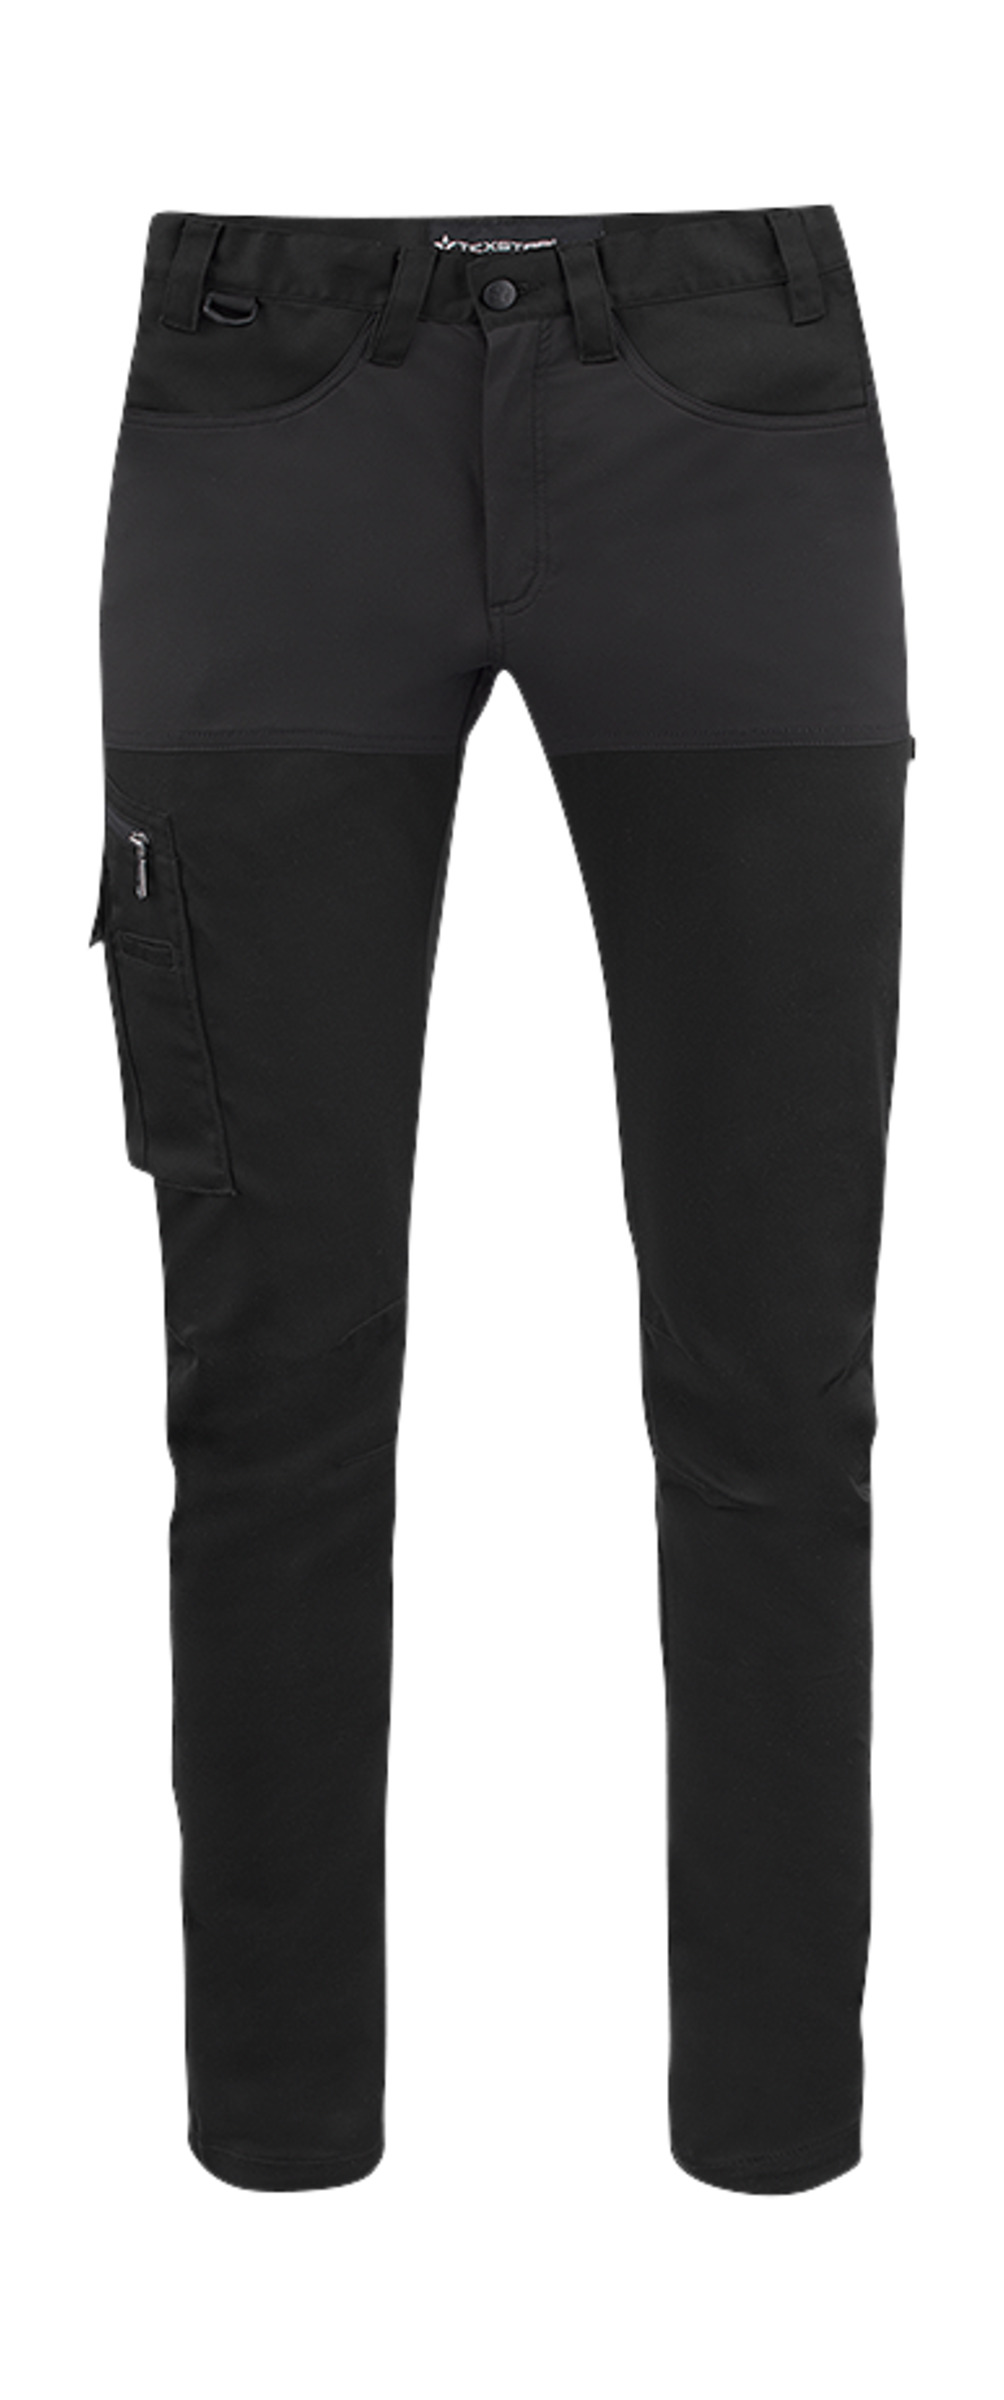 Texstar Functional Stretch Pants